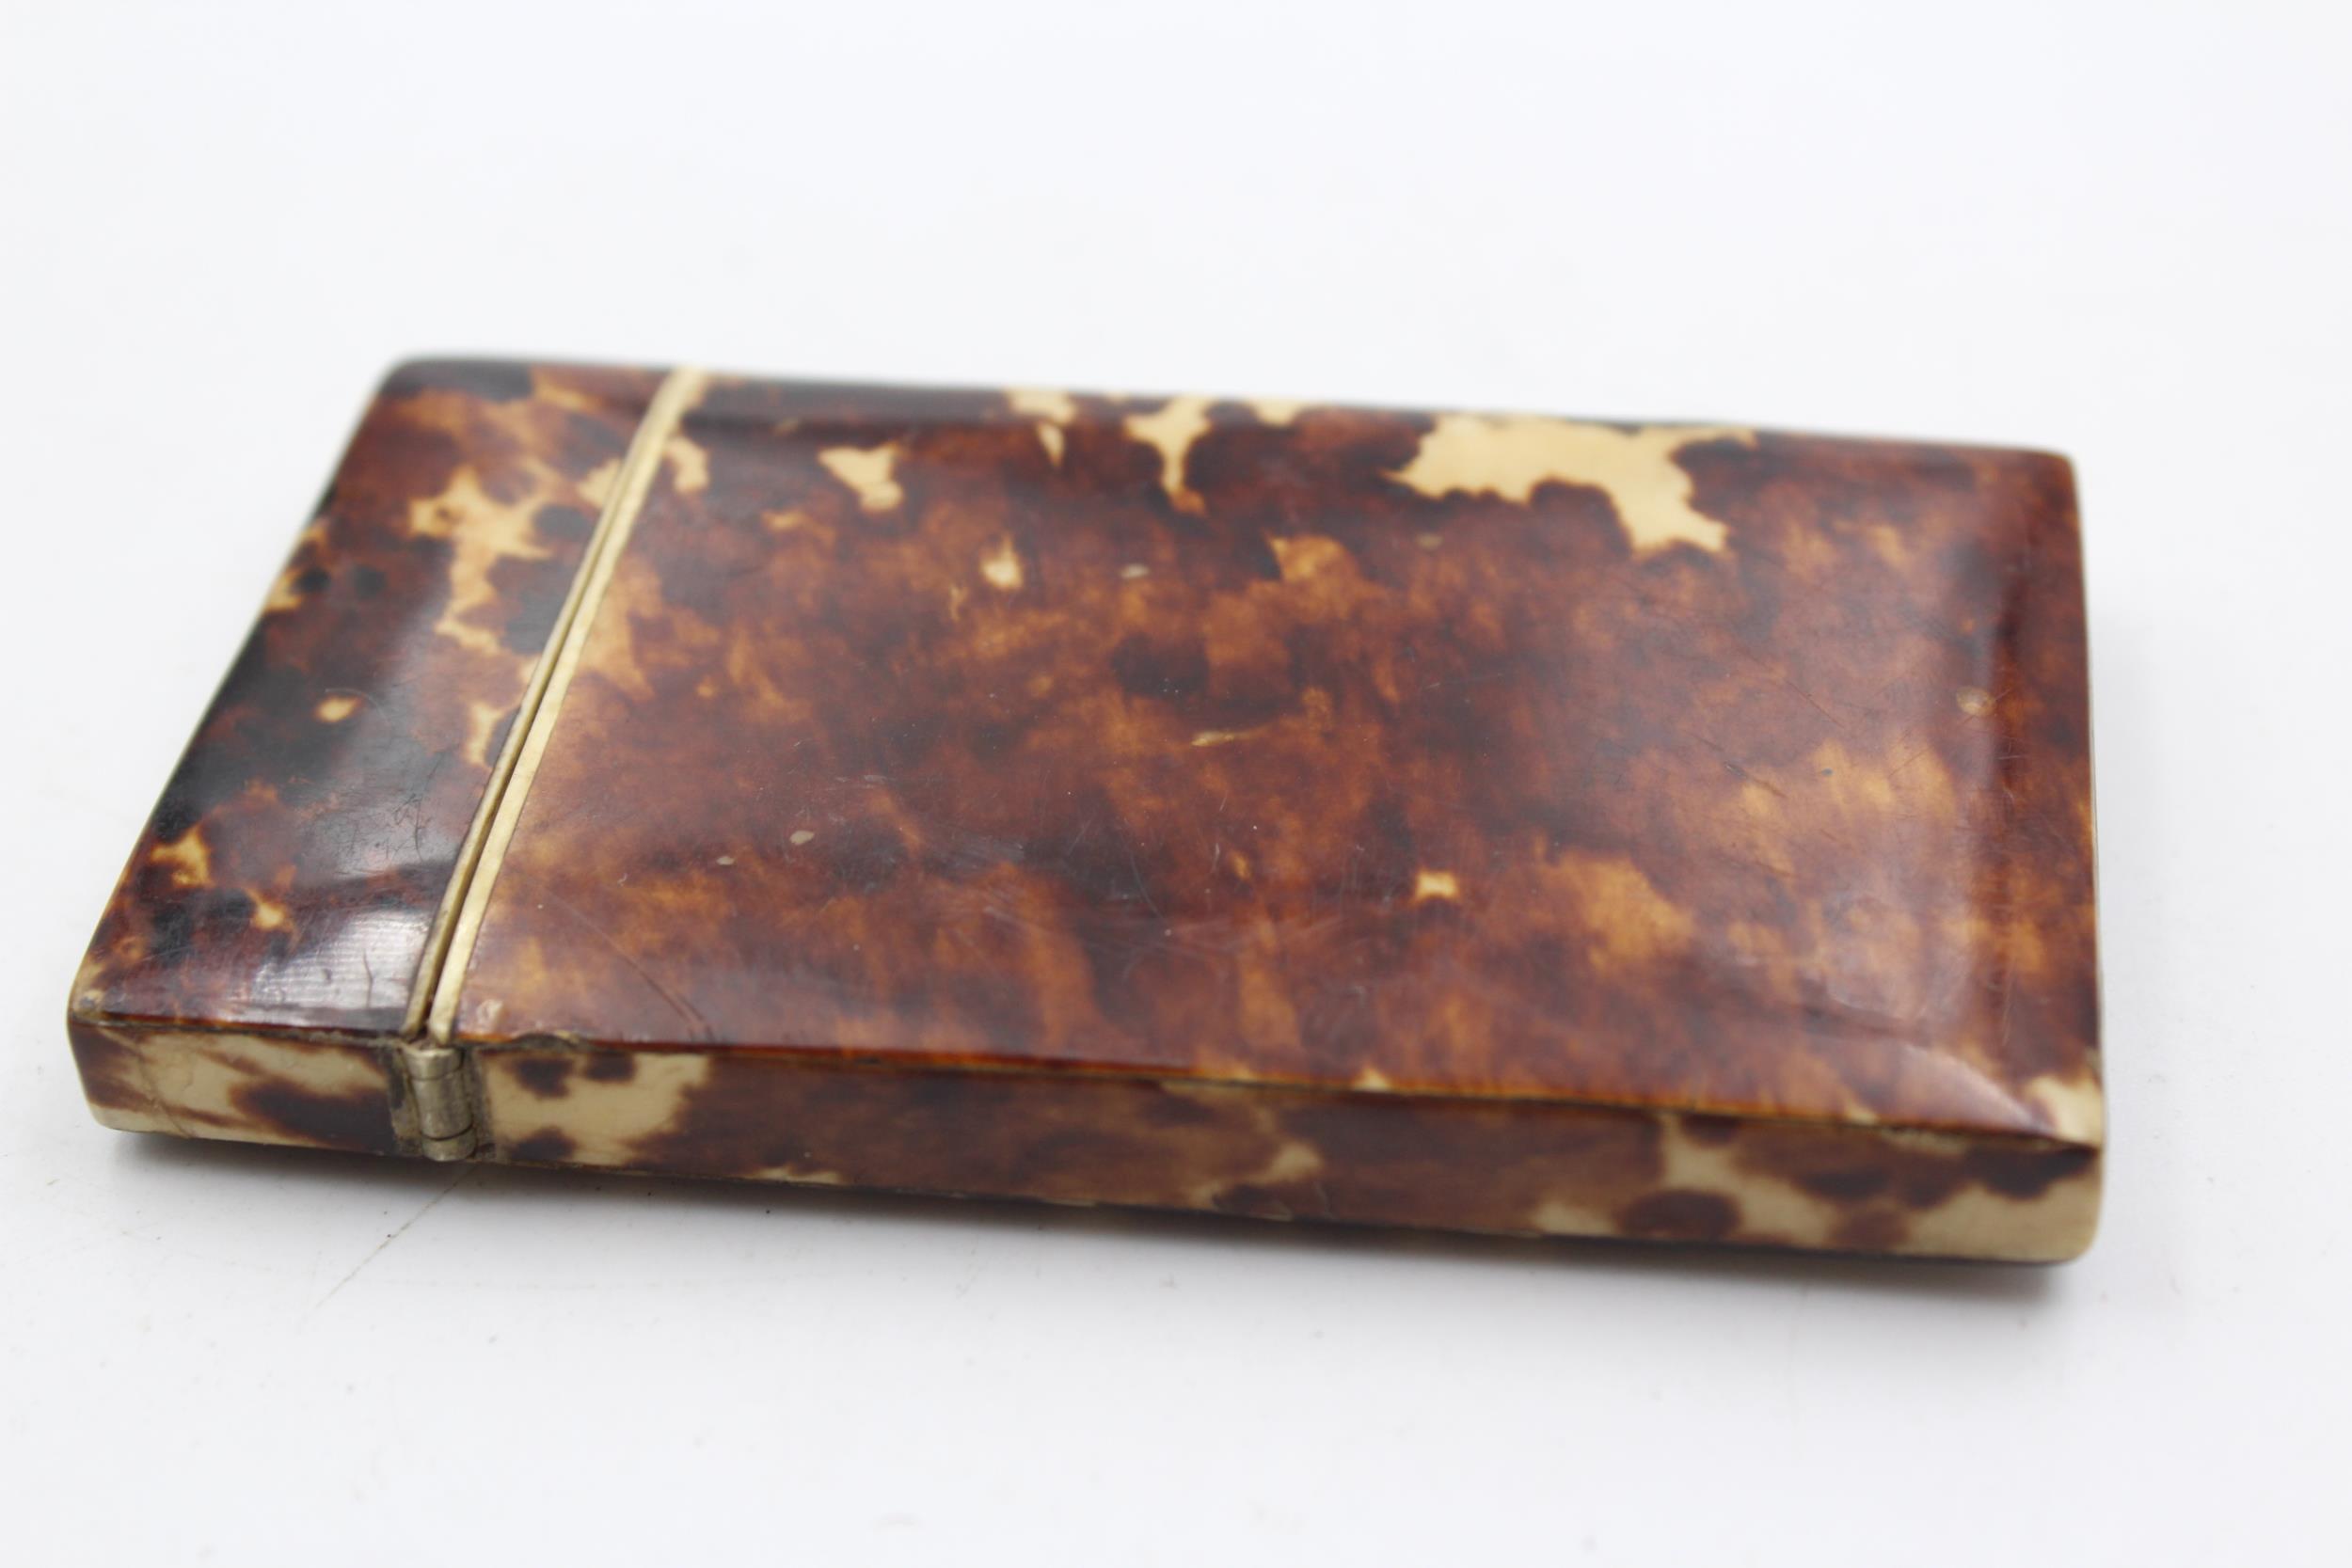 Antique / Vintage Tortoiseshell Calling Card Case // w/ Horse Themed Porcelain Pannel, Turquoise - Image 3 of 6